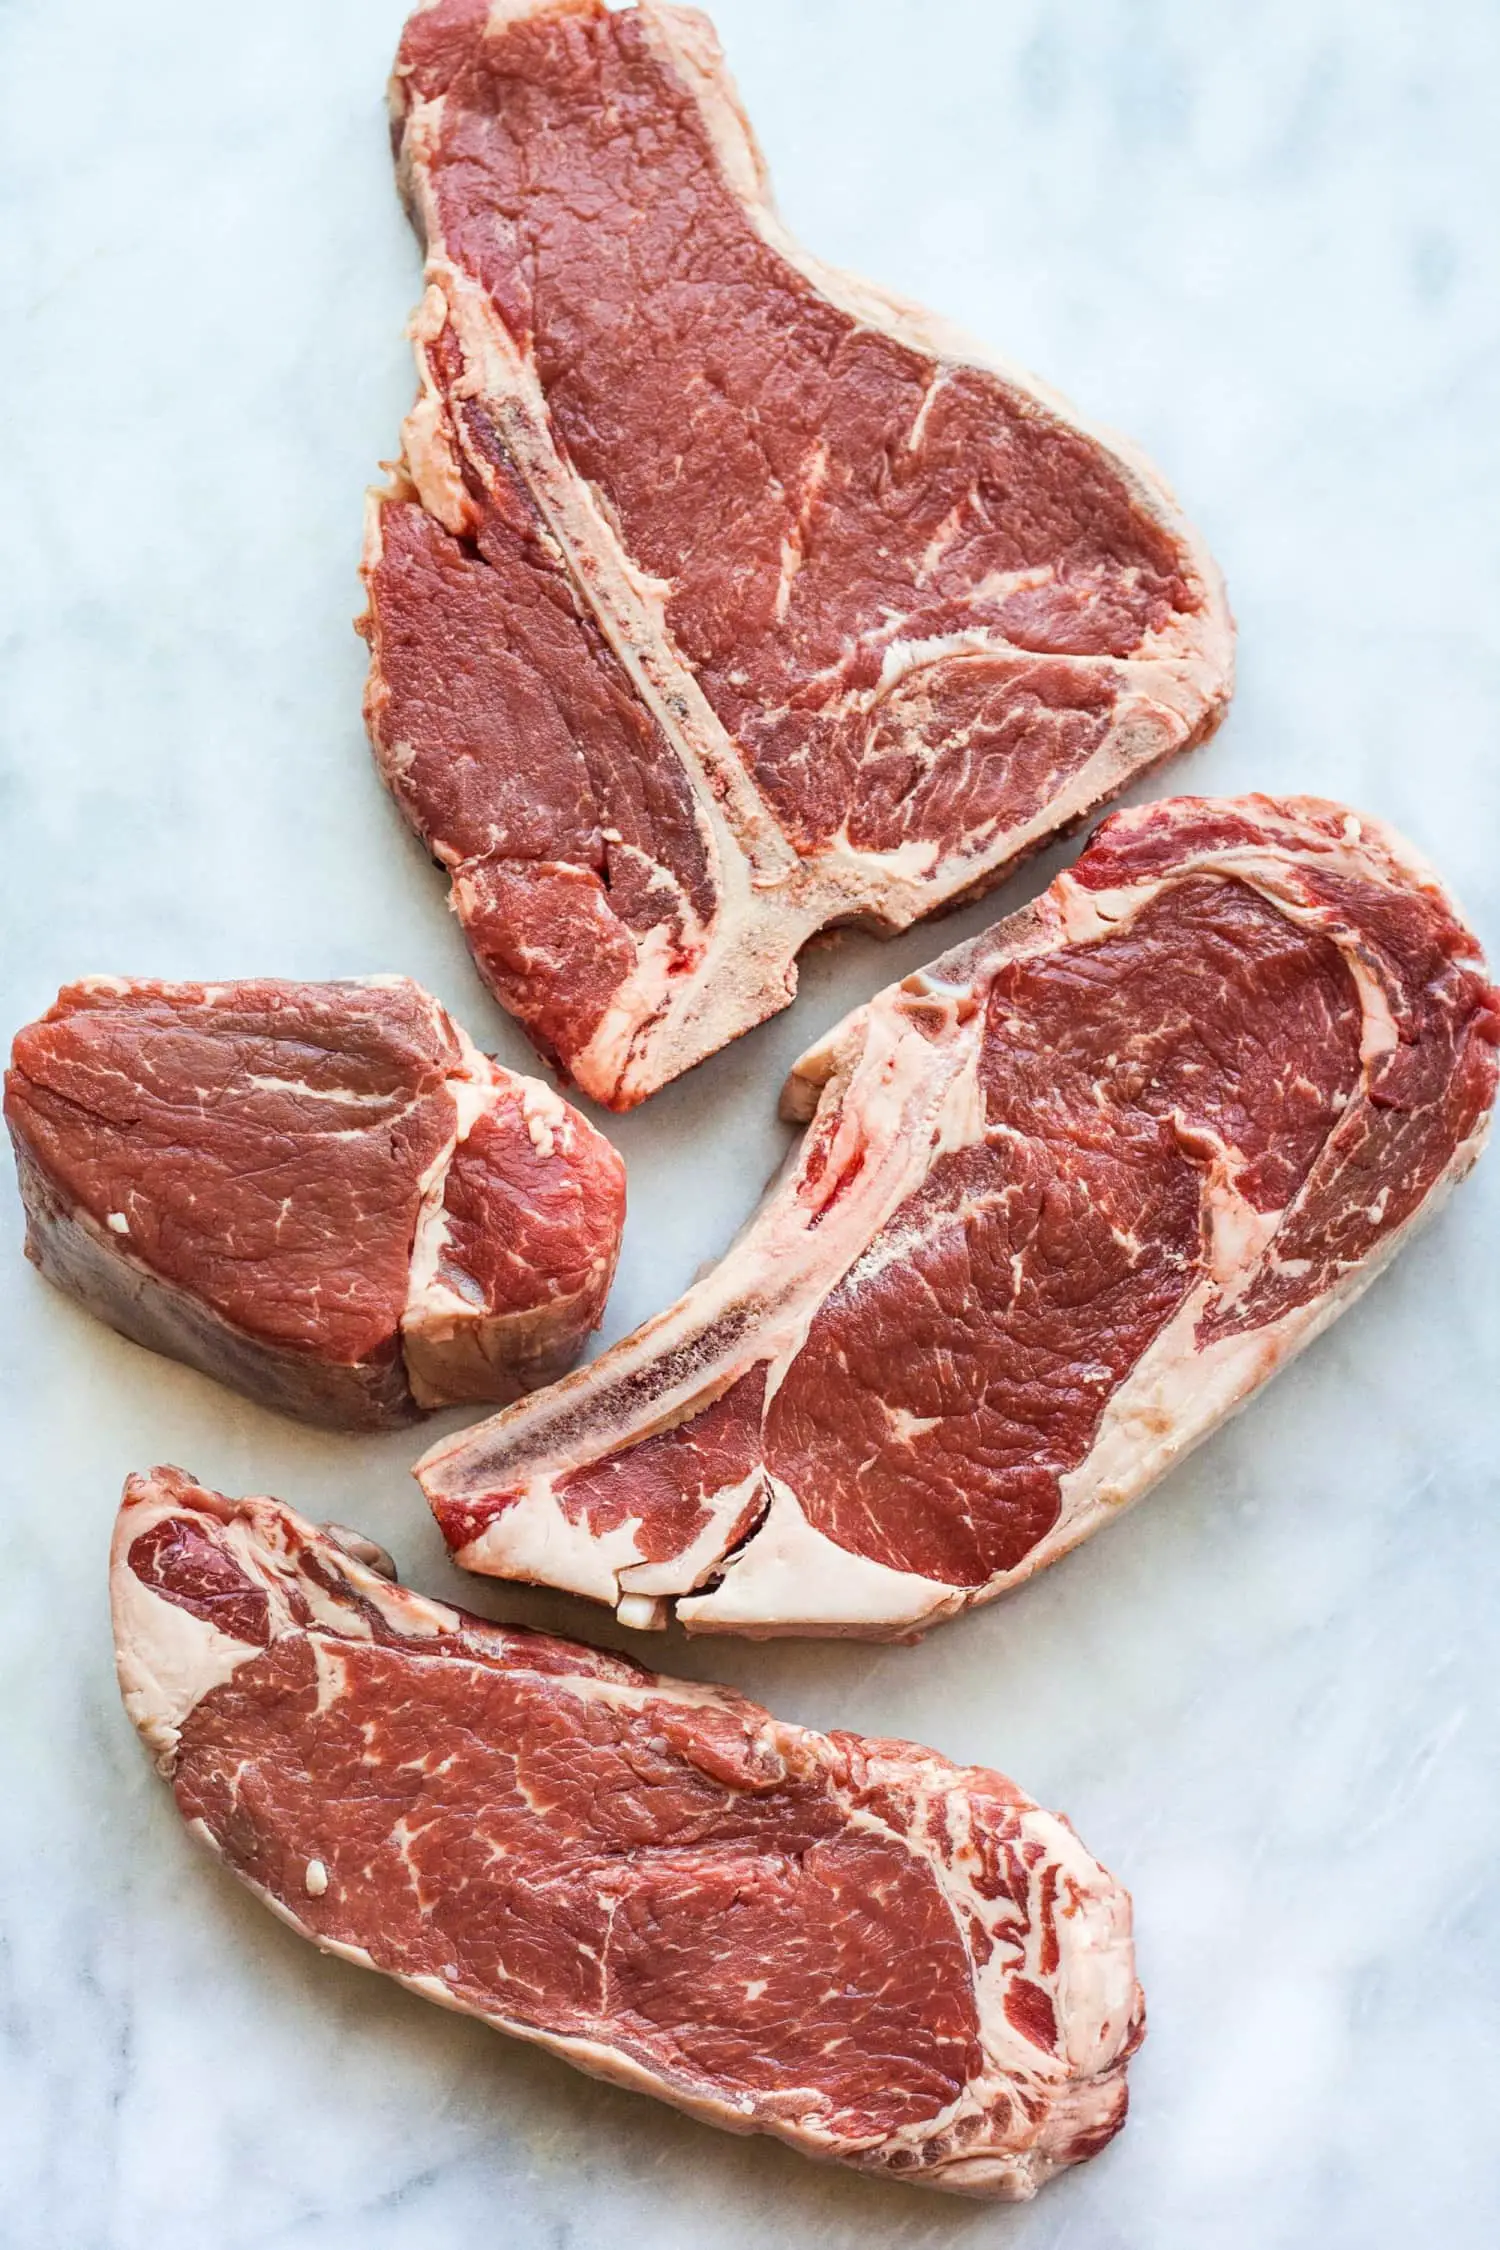 Shopping for Steak? Here Are the 4 Cuts You Should Know